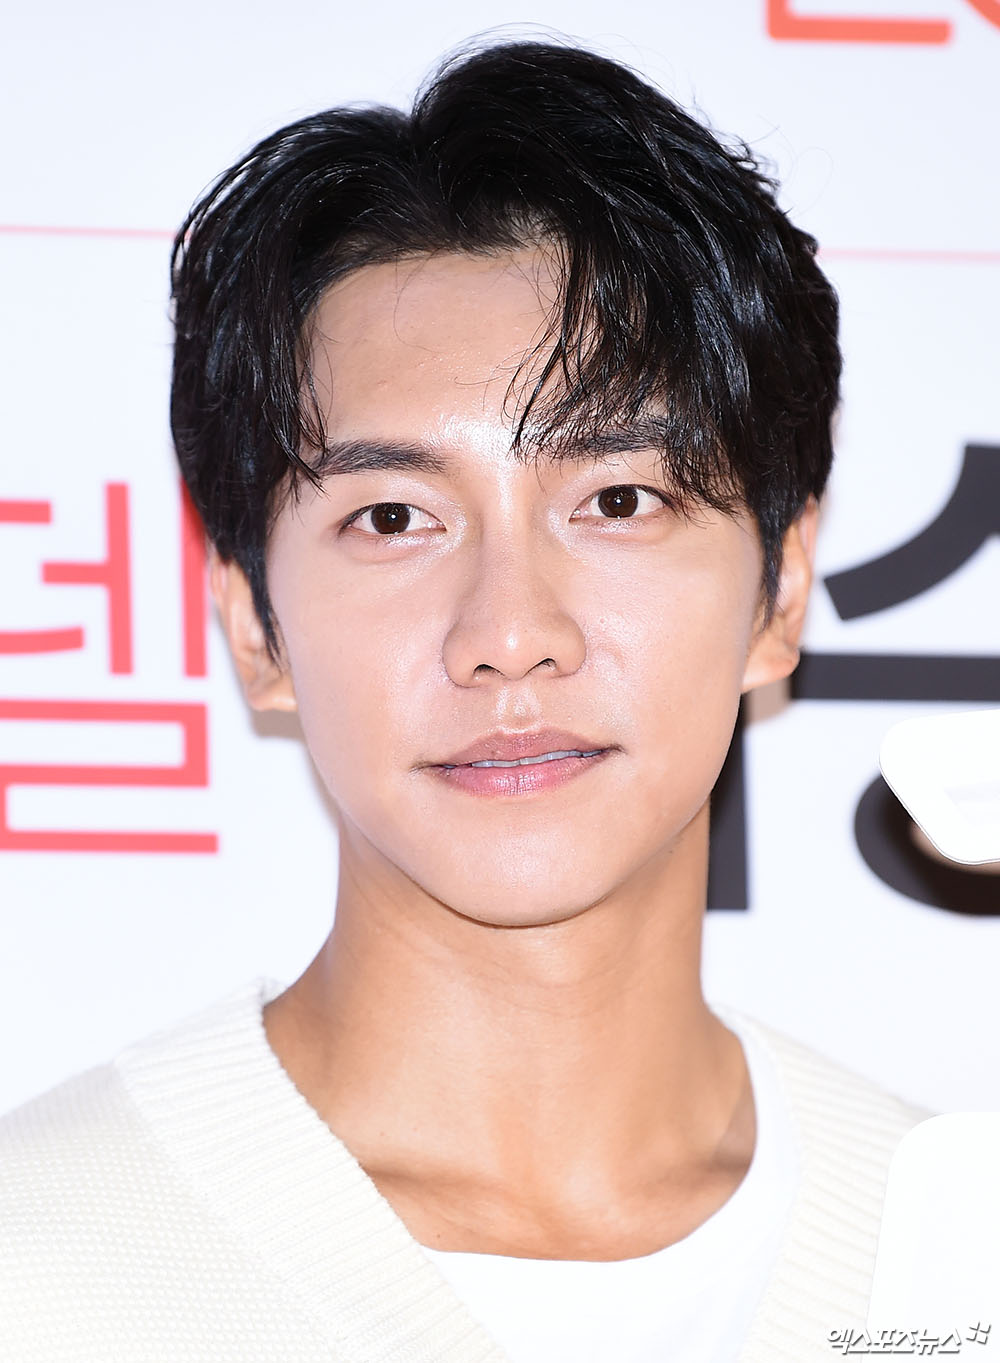 HOOK ENTERTAINMENT has announced a decisive response to Flaming for Lee Seung-gi.On the 27th, Lee Seung-gis agency HOOK ENTERTAINMENT posted a long article on the official Instagram.We decided that the actions of the Indiscreet Flaming and Flamer against Lee Seung-gi, their artist, reached a level that could not be tolerated anymore, the agency said.Despite the fact that we will sue and punish if this act continues on July 16, we are still hurting not only the artist but also the agency and fans with the indiscriminate flaming.The already collected Flaming and Flamers Ry has been transferred to the law firm Apro (APRO) on the 26th to sue, he said. We have filed more than 100 complaints against those who spread malicious rumors about The Artist in law firm Apro and July 2016.Hook Enter said, There were a lot of rumor spreaders who were in the Fined more than 500,000 won and less than 1 million won, and all of them appealed for the righteousness, but only one case was punished without the righteousness.And Lee Seung-gi keeps this attitude again.In addition to the accusations based on the Ry, the agency will continue to respond to malicious slander, such as false information, insults, and defamation, directed at its artist through monitoring of the flamers, the agency said repeatedly. We will be punished according to the law without any consultation or preemption.Meanwhile, Lee Seung-gi is appearing on SBS drama Baega Bond as well as SBS entertainment Little Forest.The official position of the hook entertainment side is described below.Hook EntertainmentWe believe that the actions of the Indiscrete Flaming and Flamer against Lee Seung-gi, their artist, have reached an unforgivable level.Despite the fact that it is already scheduled to be punished if this act continues on July 16, 2019, it is still hurting not only the artist himself but also his agency and fans with the Indiscrete Flaming.In order to protect our artist, we will proceed with legal action through law firm Apro (APRO).Ry, a self-described group of Flaming and flammers already collected, has been transferred to law firm Apro (APRO) on September 26, 2019 for the complaint.We filed over 100 complaints against law firm Apro (APRO) and those who spread malicious rumors about The Artist in July 2016, and there were many rumors that were financed from 500,000 won to less than 1 million won. All of them appealed for goodwill, but they proceeded as punishment without any goodwill.In addition to the accusations based on the Ry, we will continue to respond to legal action if malicious slander, such as false information, insults, and defamation, is found to be directed at our artist through continuous monitoring of the flamers.As mentioned earlier, I will once again inform you that all of these acts will be punished under the law without any consultation or prior consultation.Thank you.Photo = DB